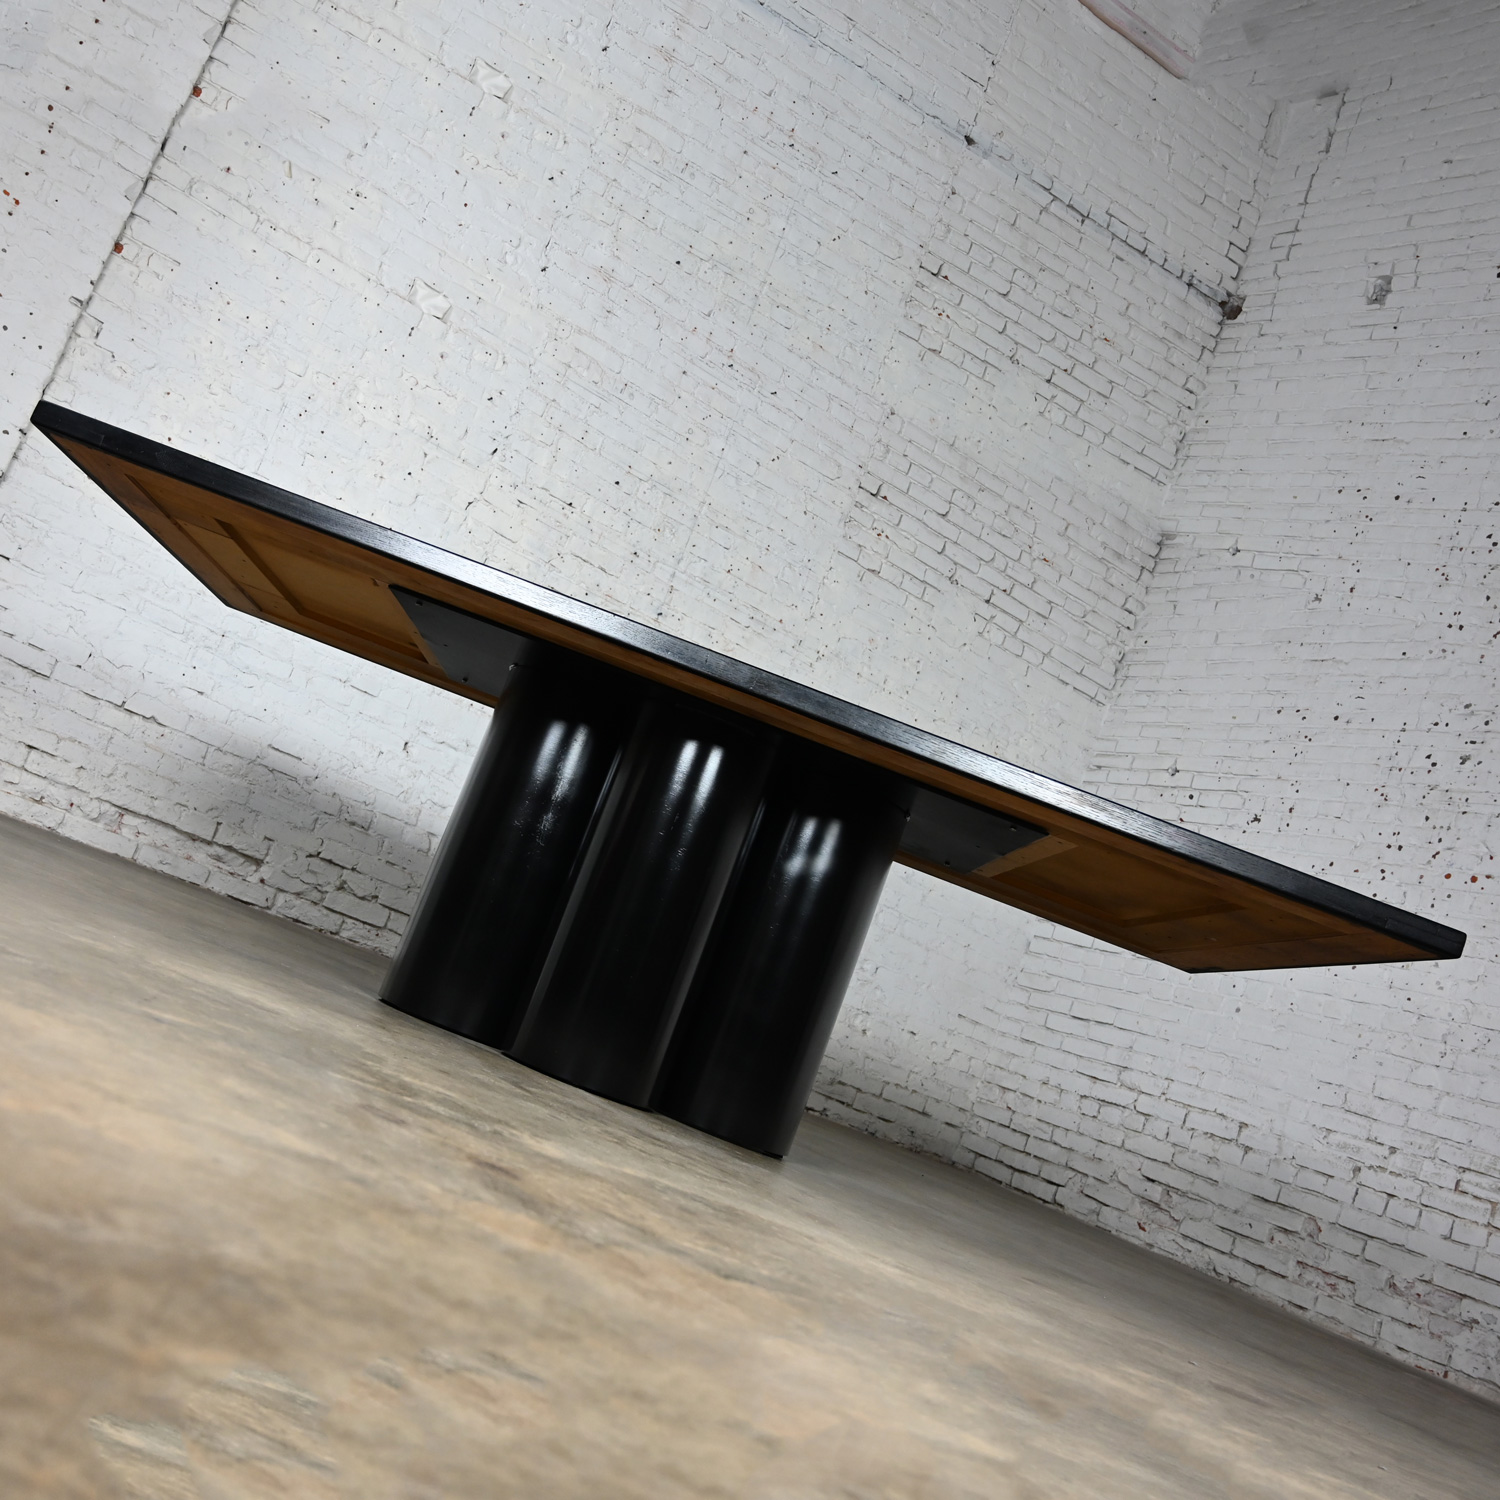 Late 20th Century Modern Dining Table Black Painted Metal Cylinder Pedestal Base & Black Oak Framed Top with Brass Insert